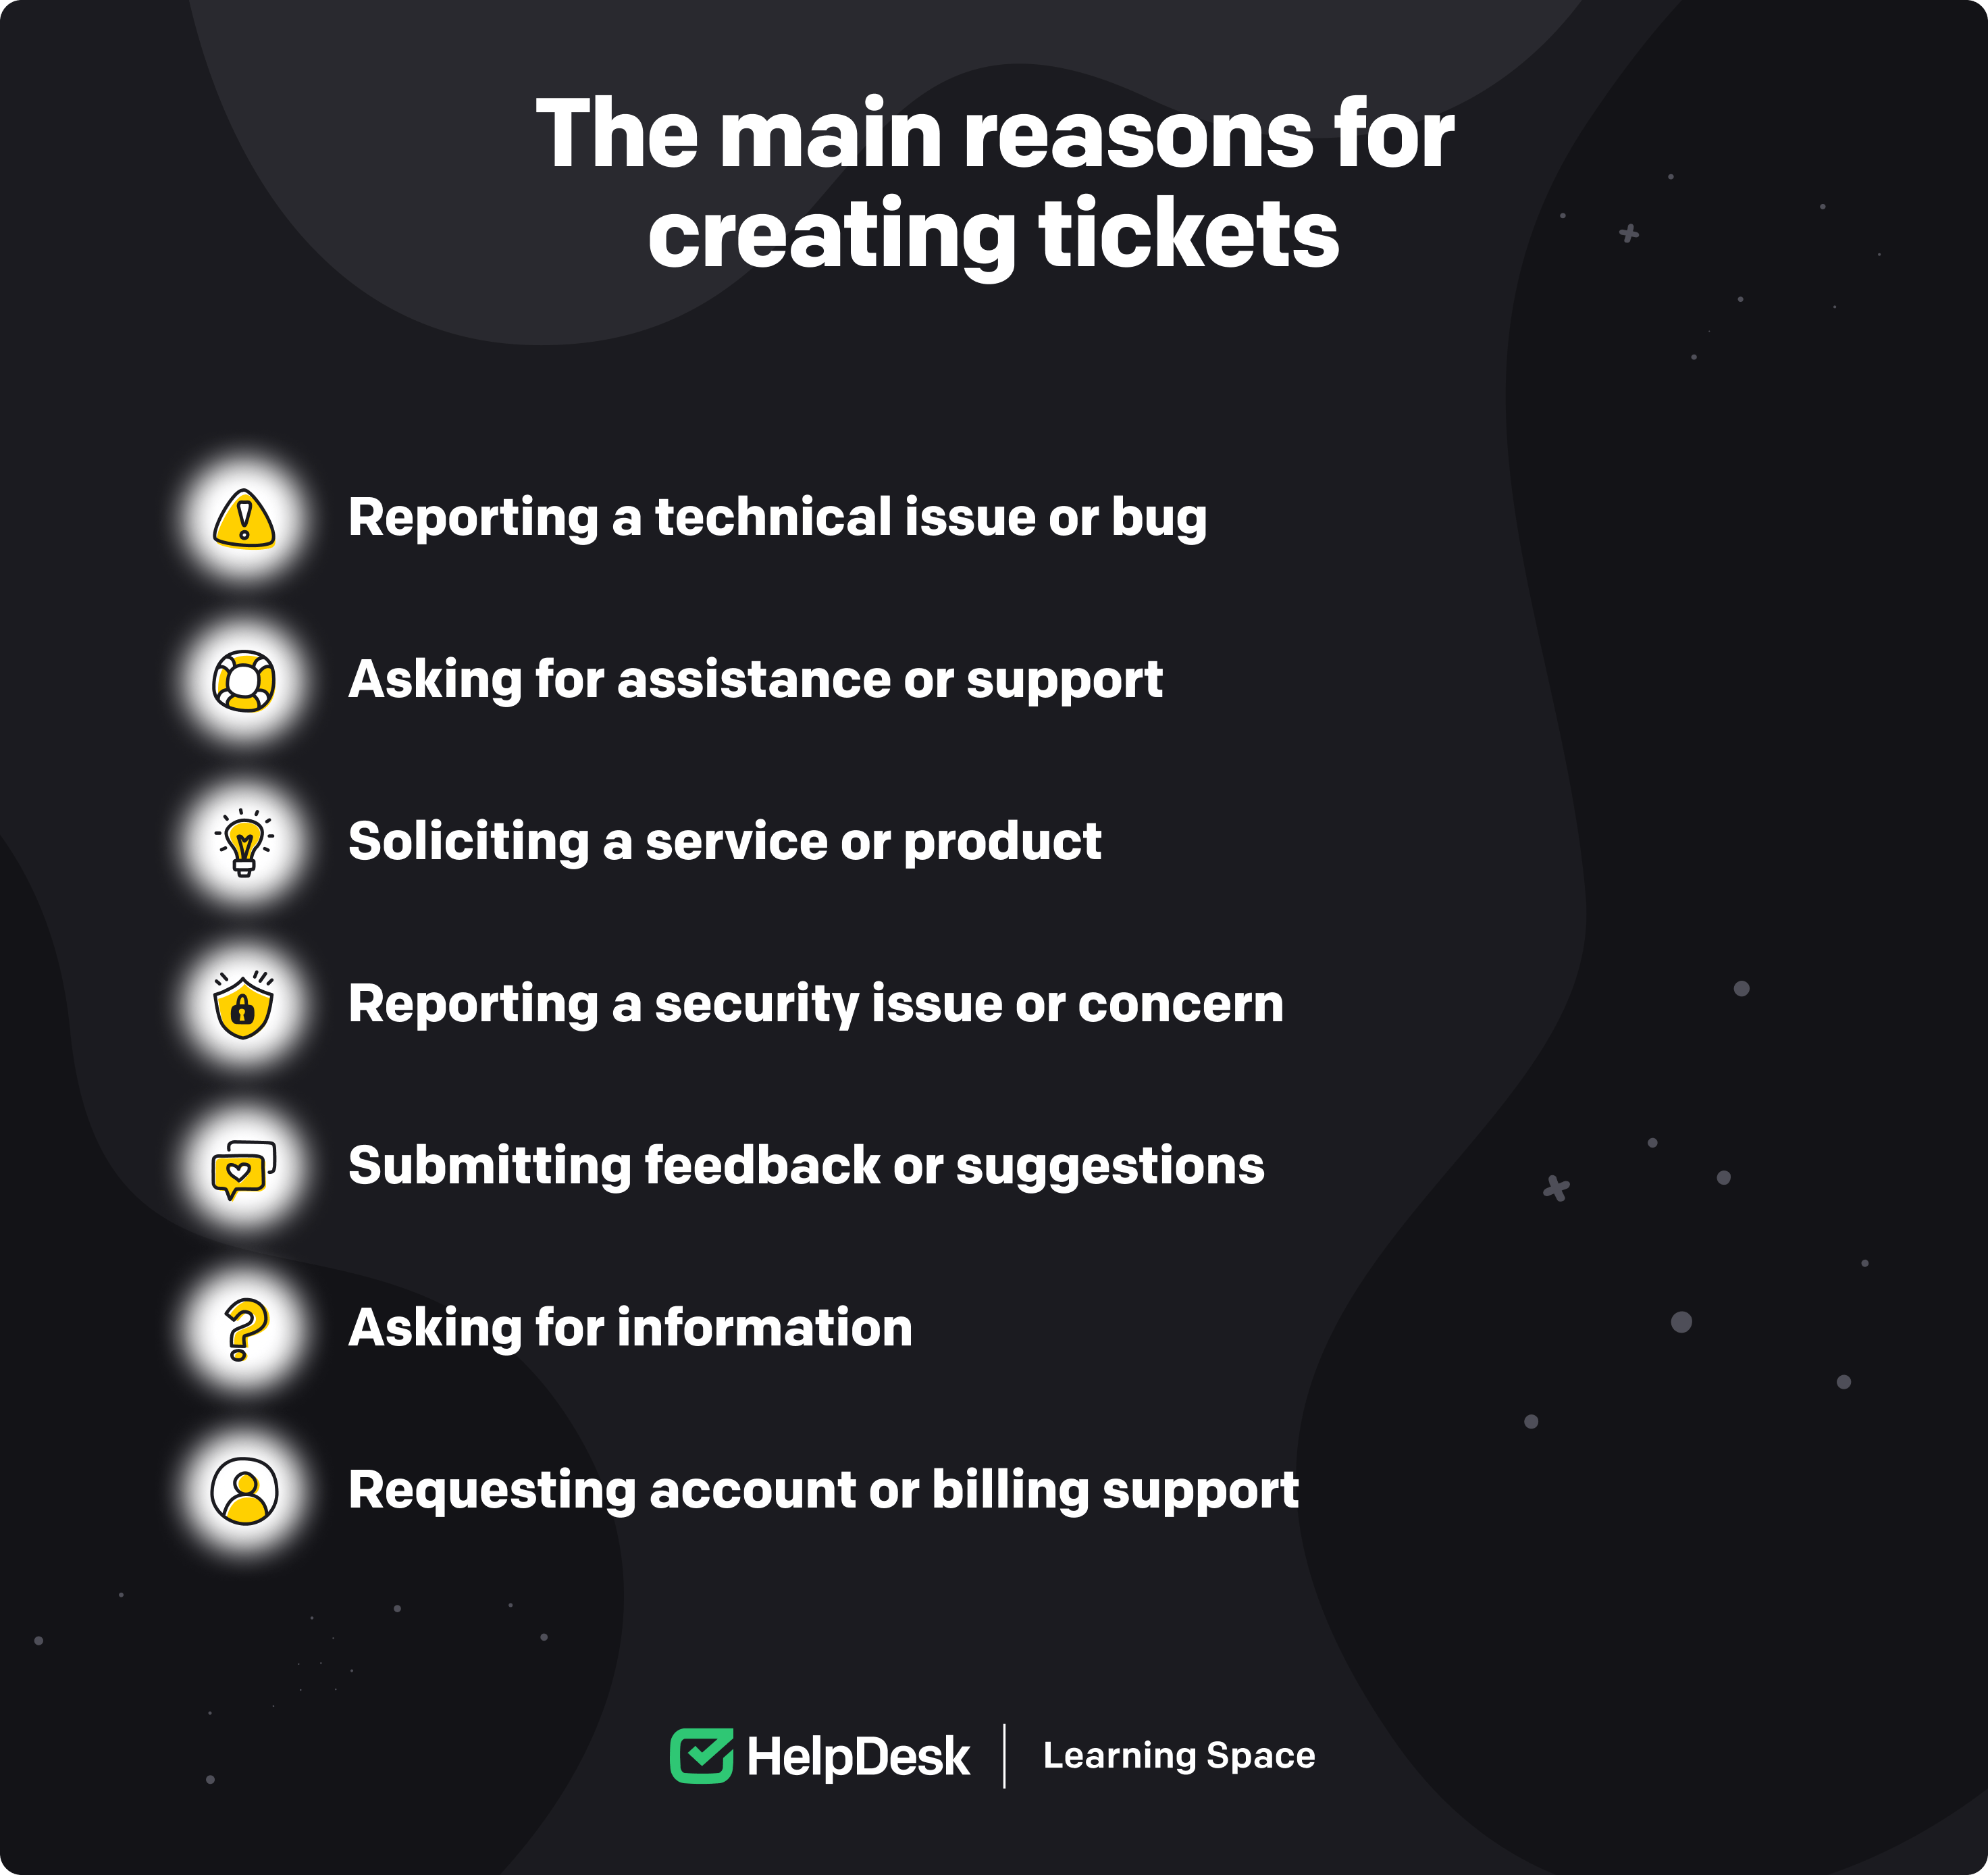 Reasons for creating tickets